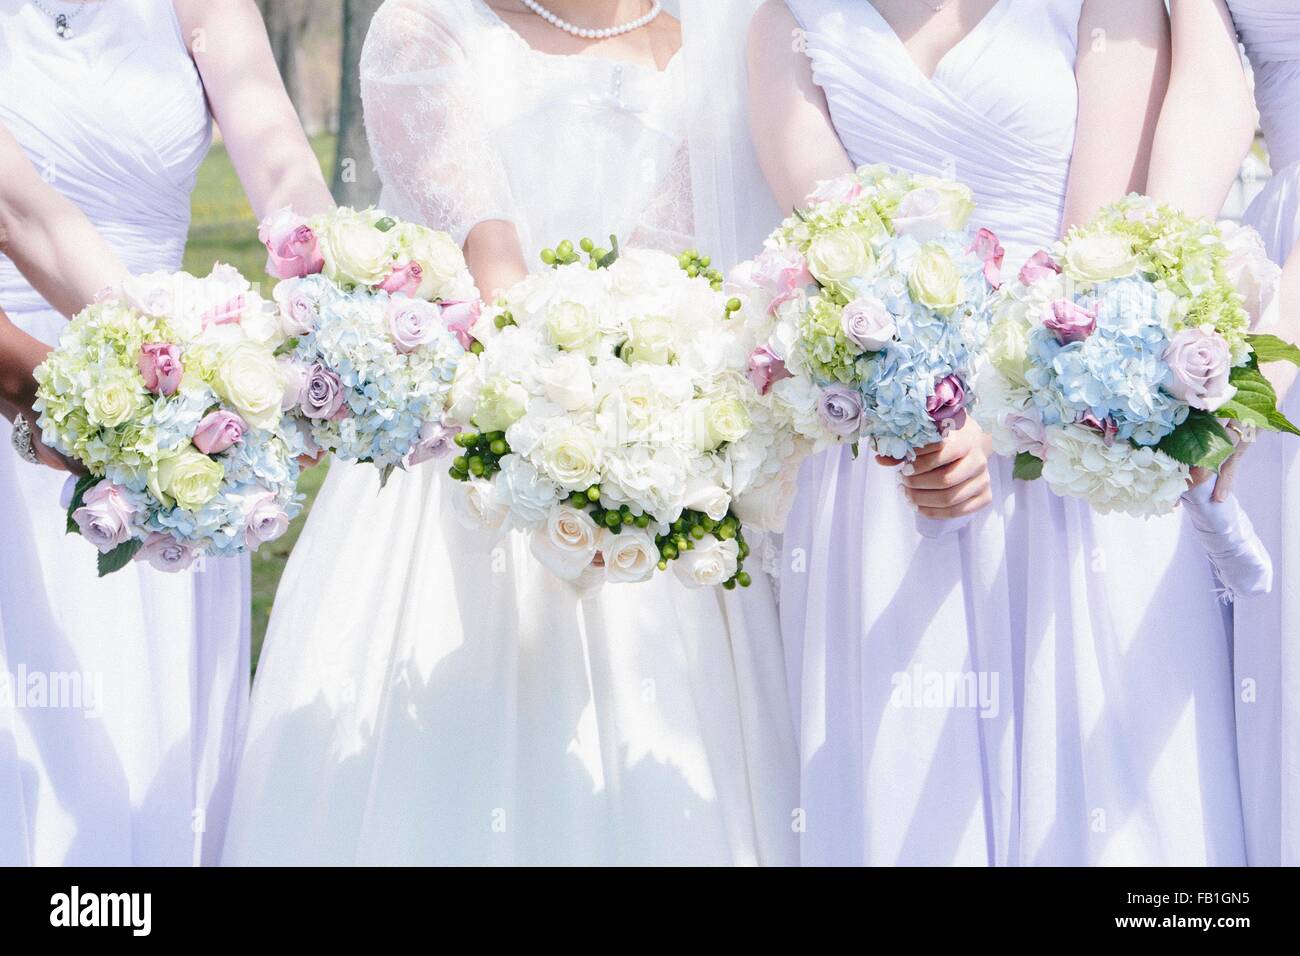 Cropped view of bride and bridesmaids side by side holding flower bouquets Stock Photo